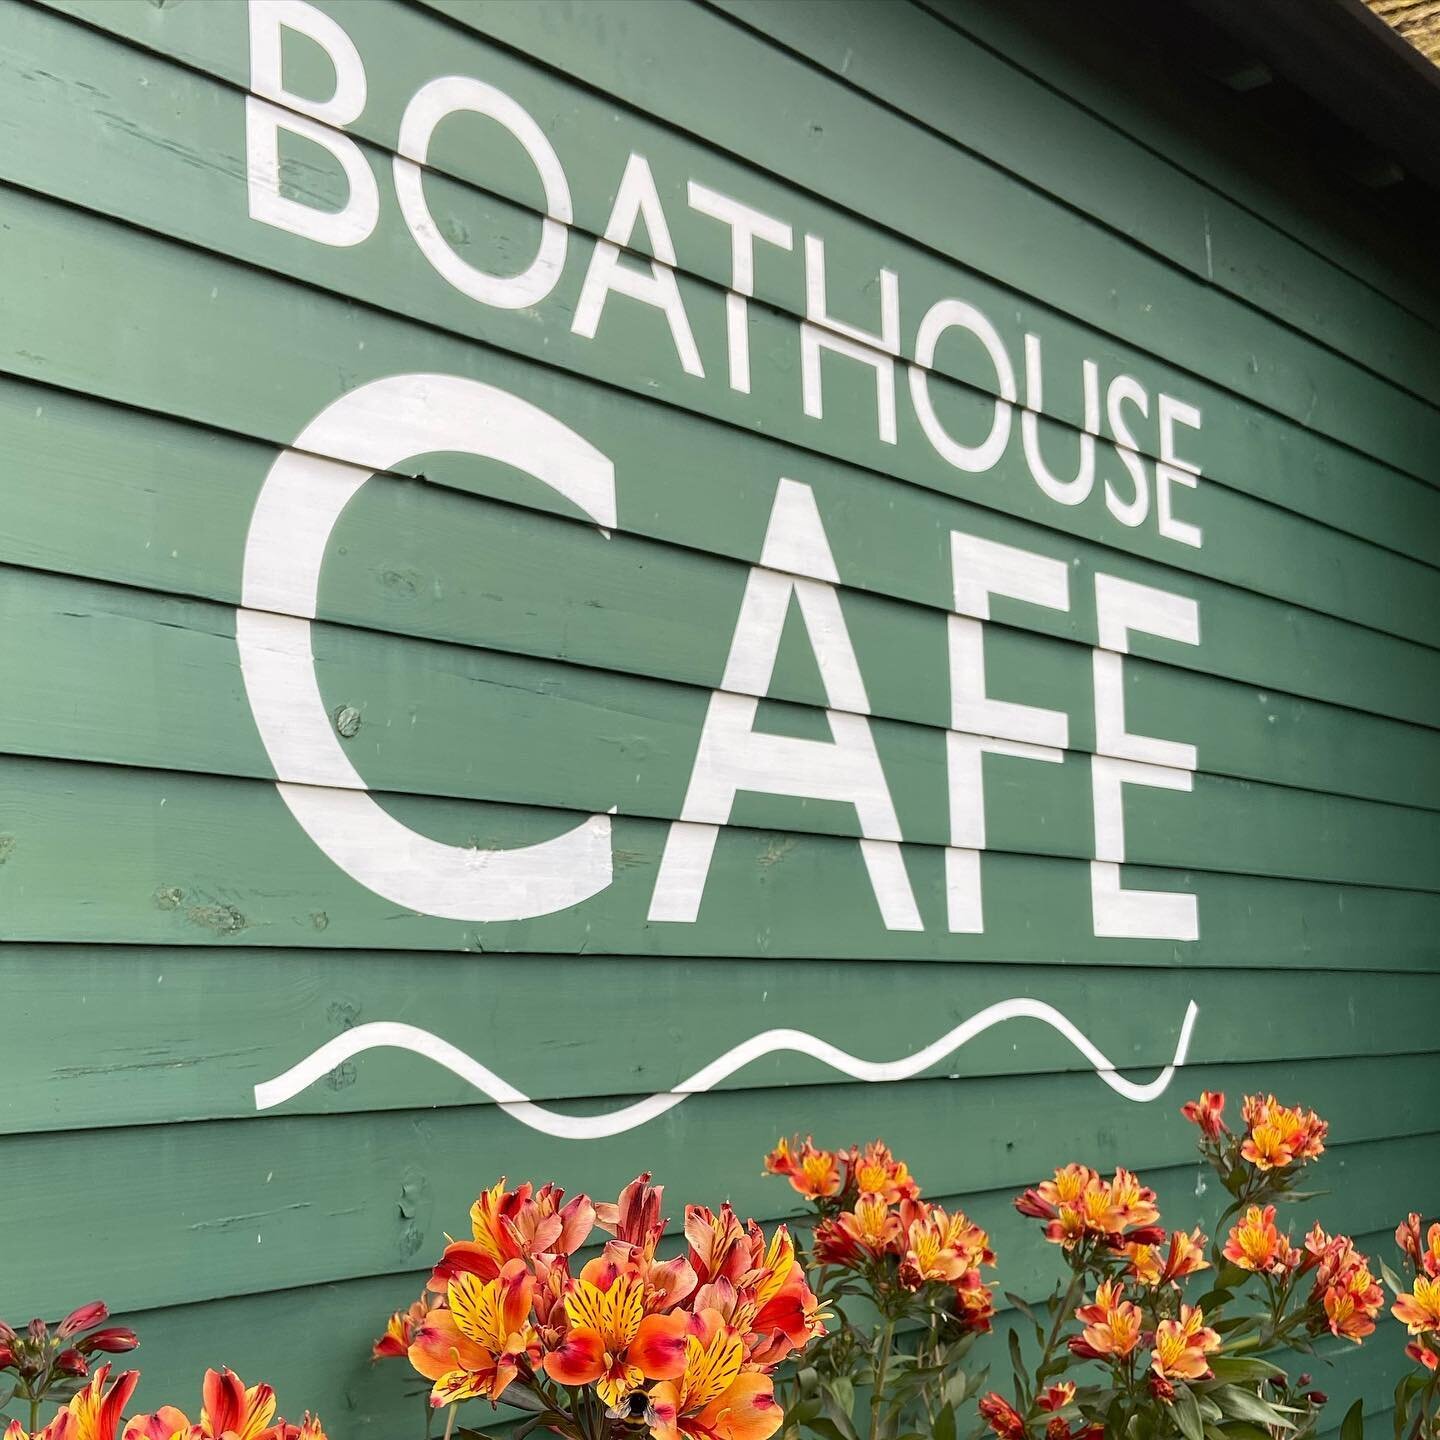 With social distancing signage and queue barriers in place from @chalkandcheesedesign , the Boathouse cafe has reopened to give park lovers some delightful treats in this beautiful weather. 🌞 🍦 ☕️🥤(We hand painted the sign too!) 🎨